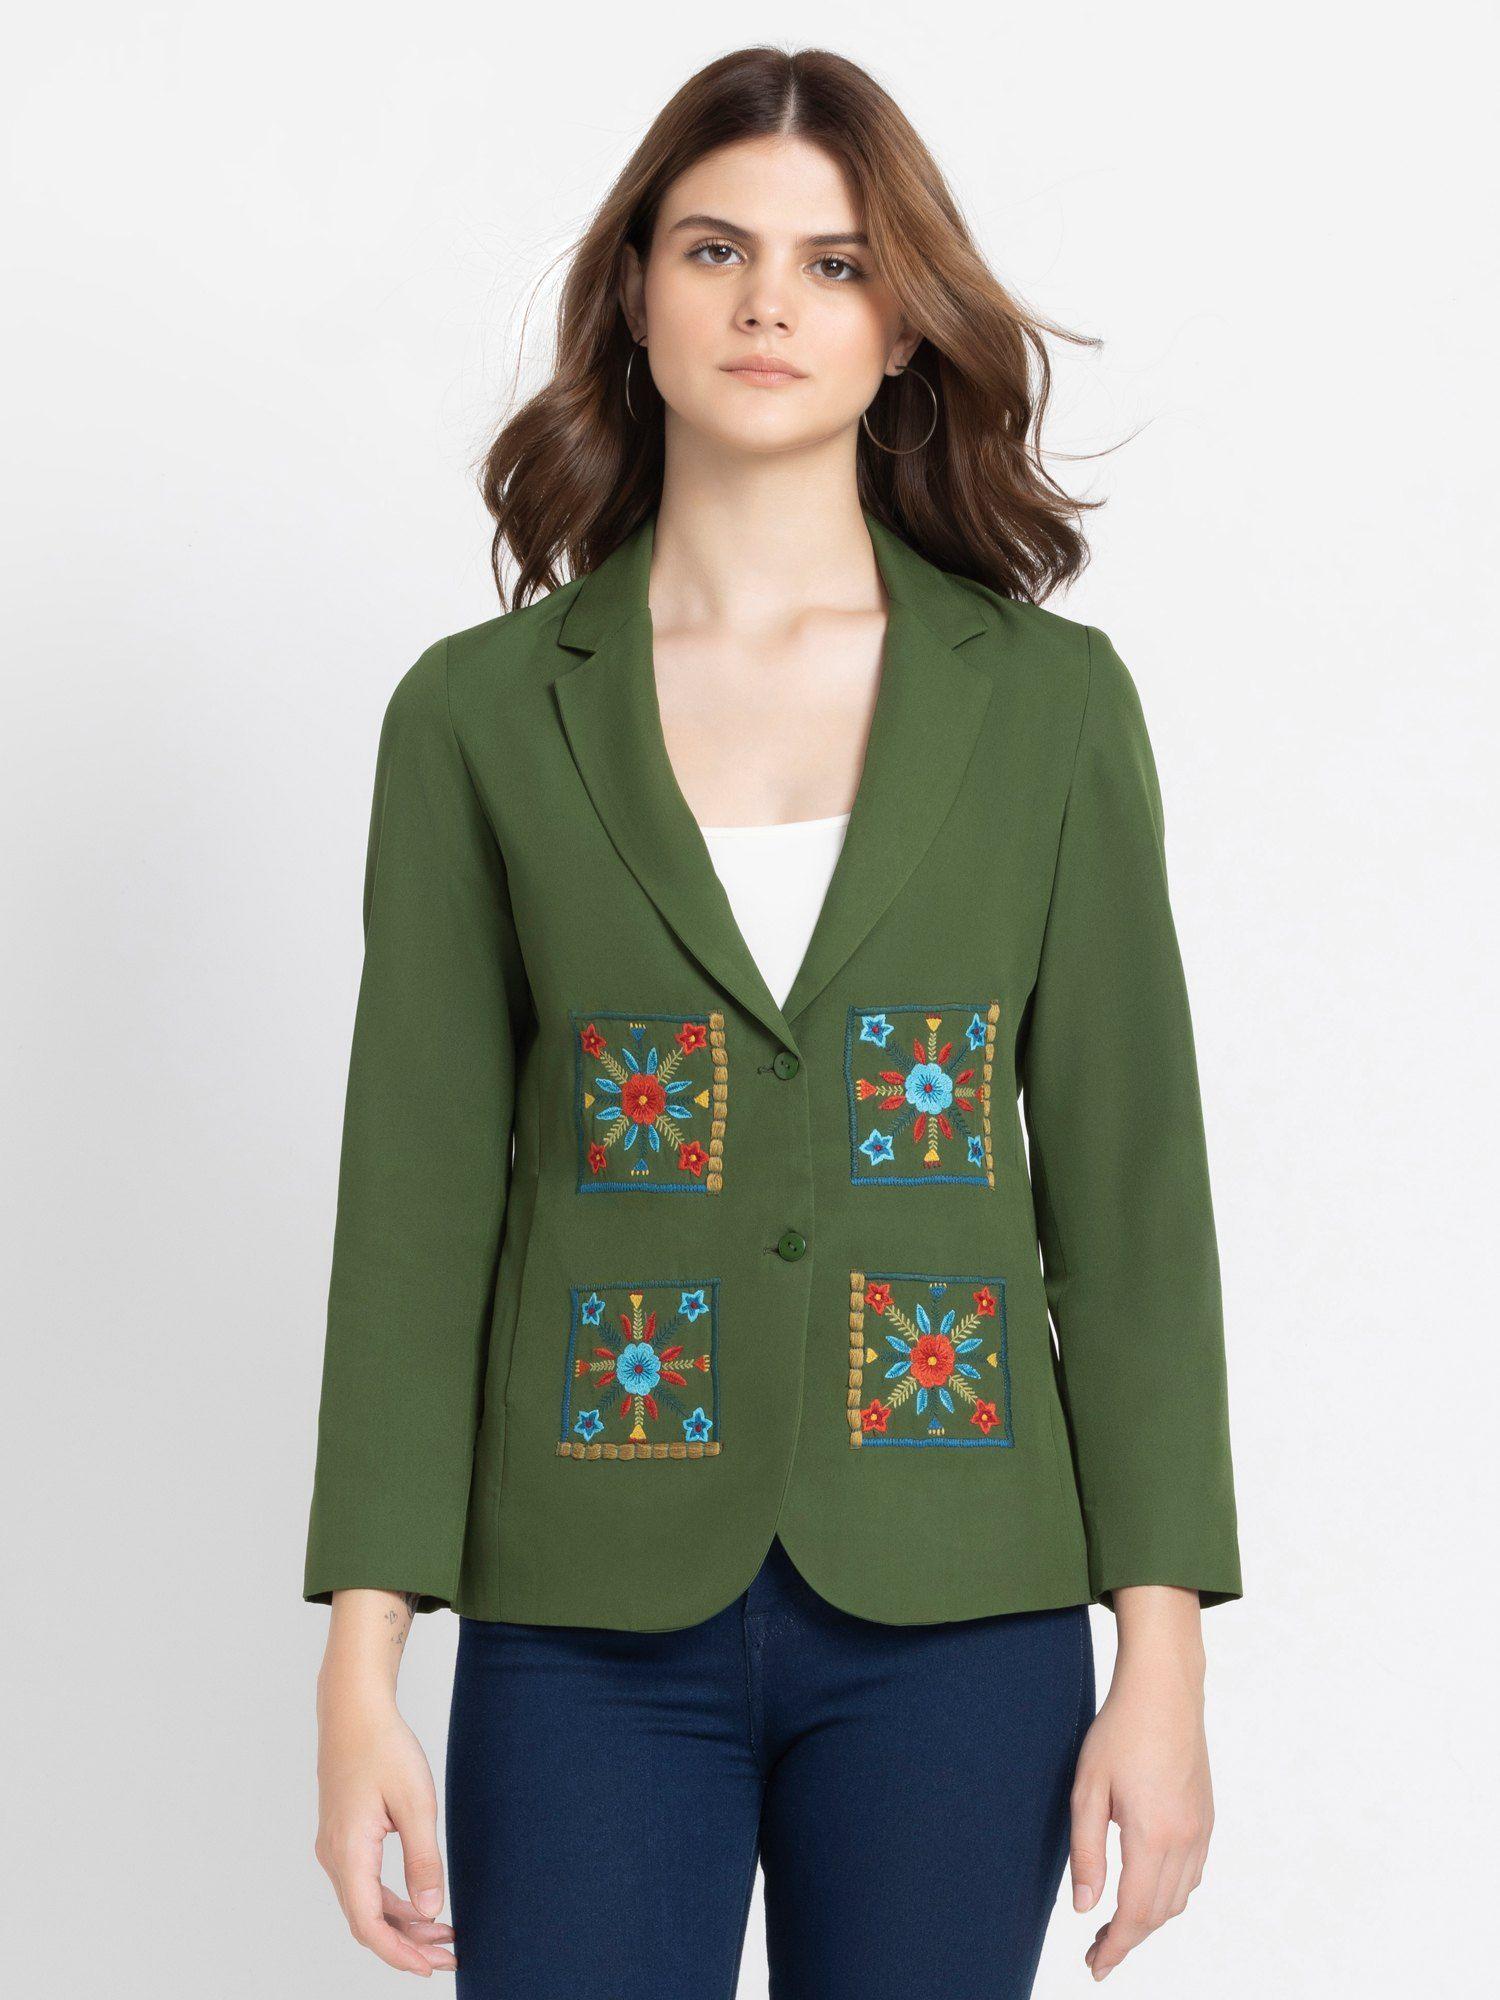 notched-lapel-collar-olive-solid-full-sleeves-casual-blazer-for-women